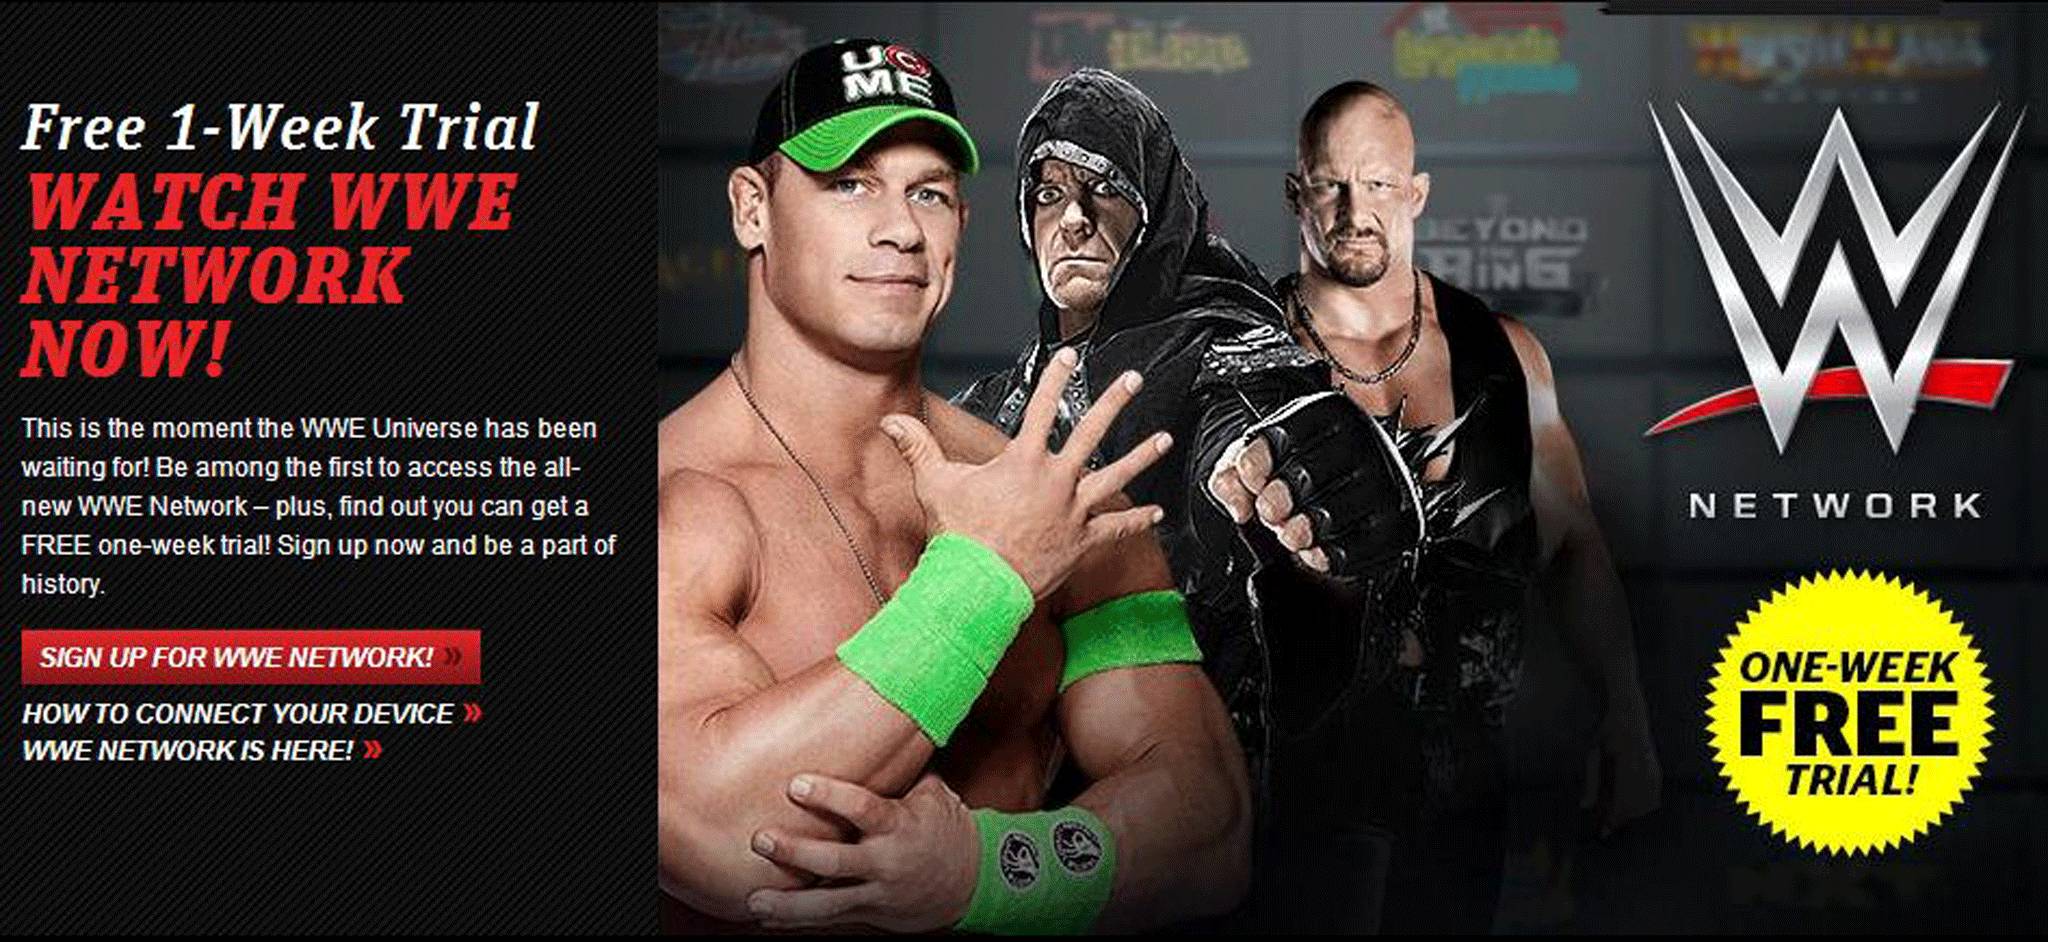 WWE Network has enticed users with a one-week free trial